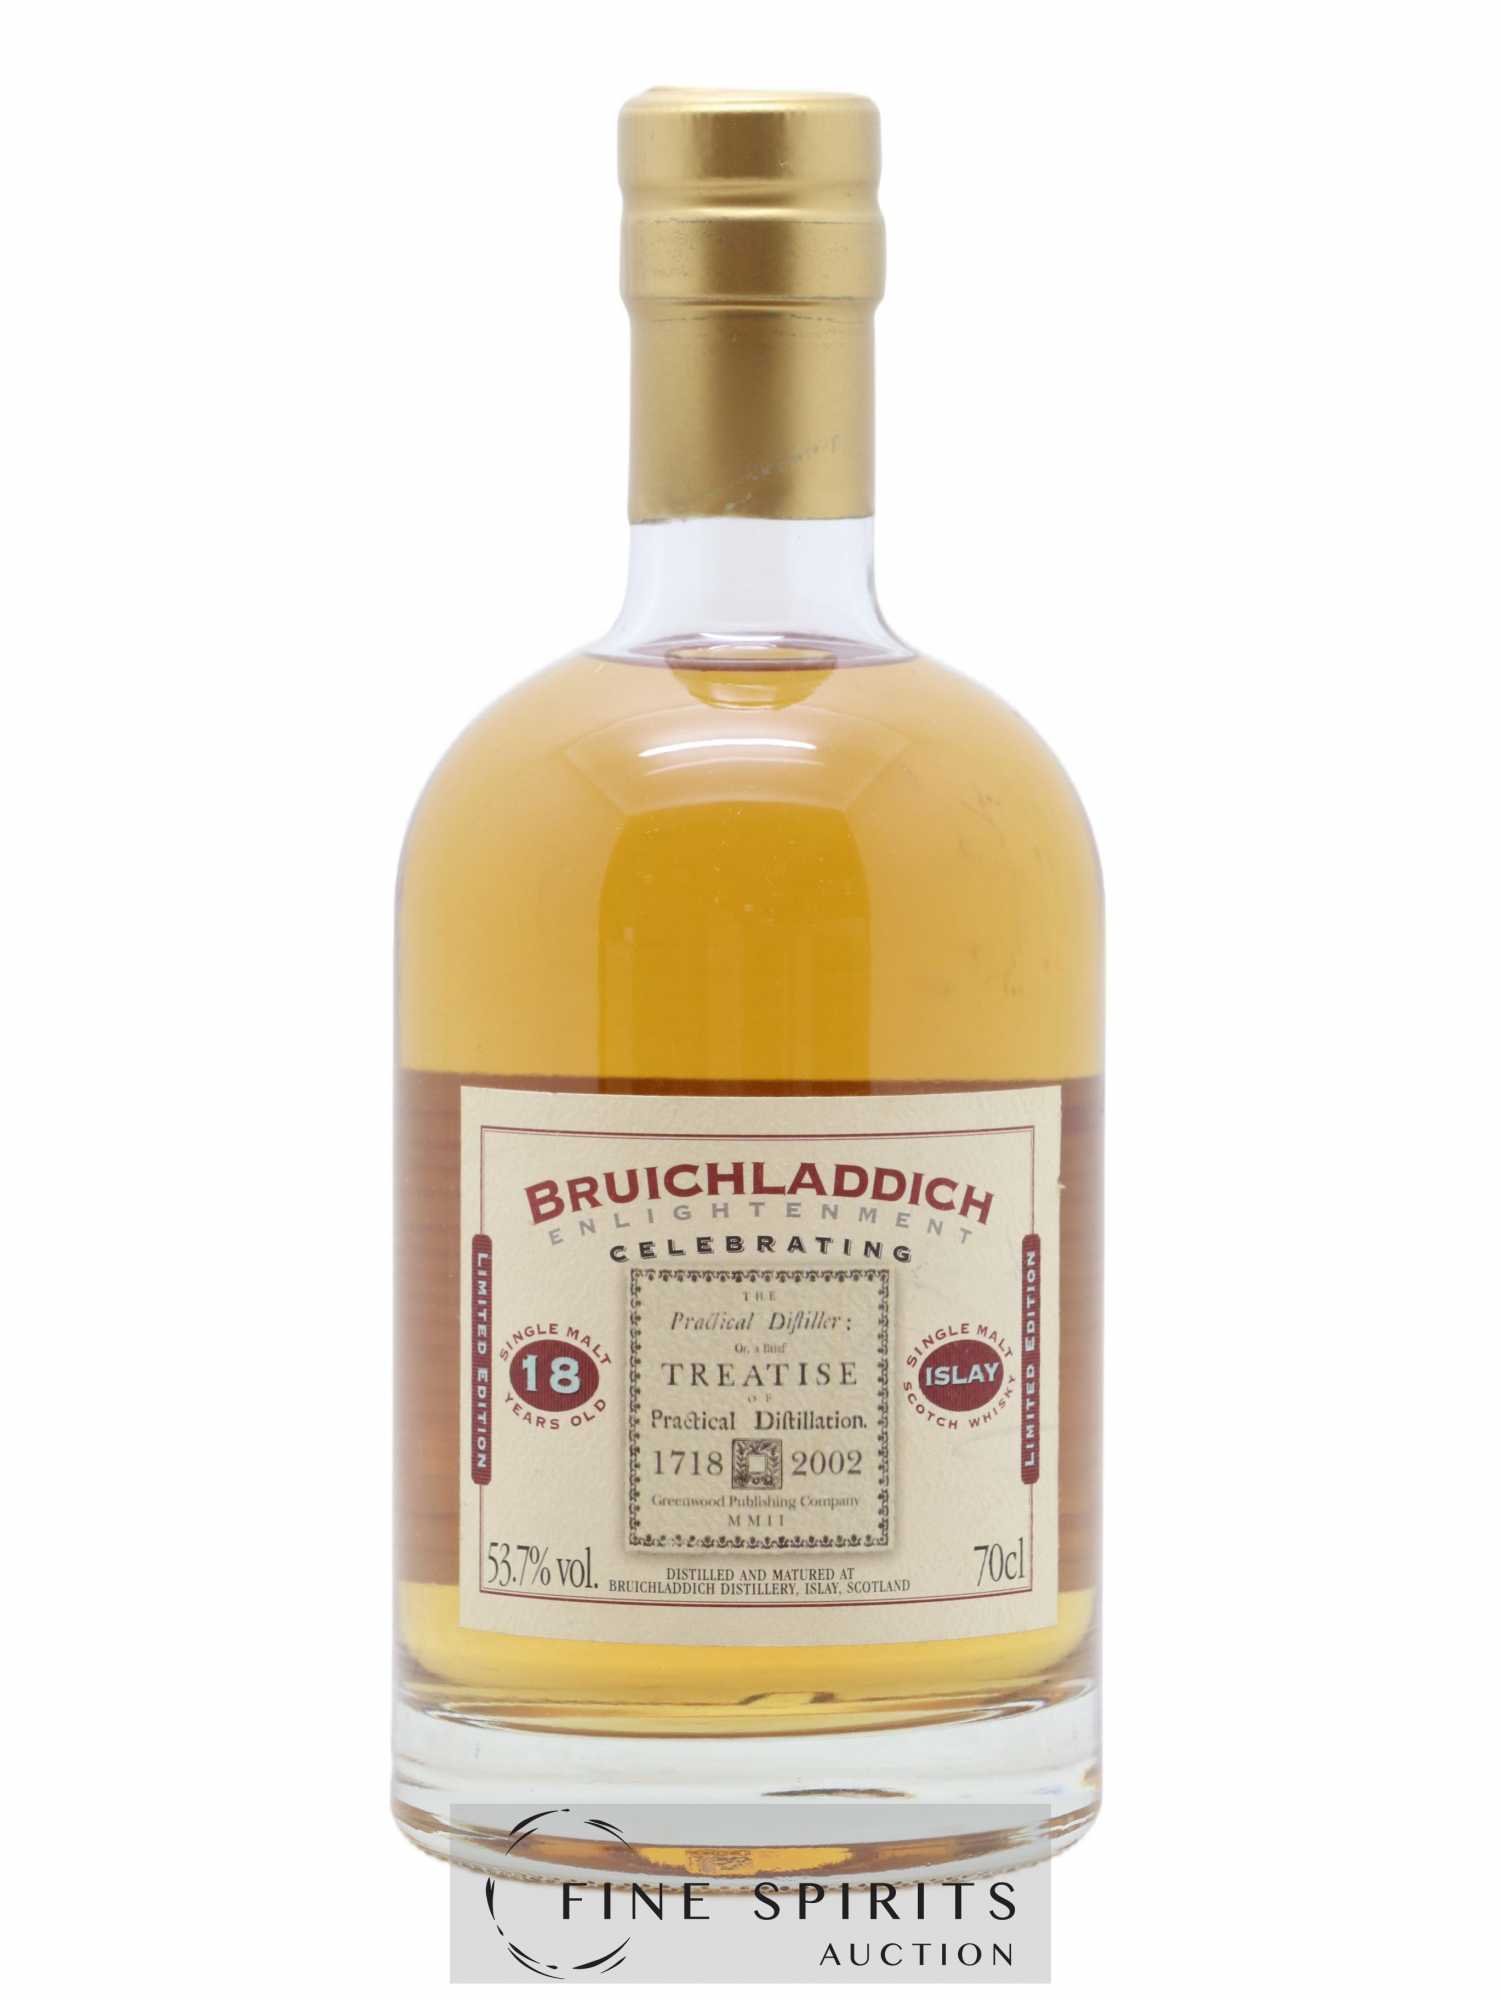 Bruichladdich 18 years 1984 Of. Enlightenment Cask n°14,15 - One of 500 - bottled 2002 Limited Edition 